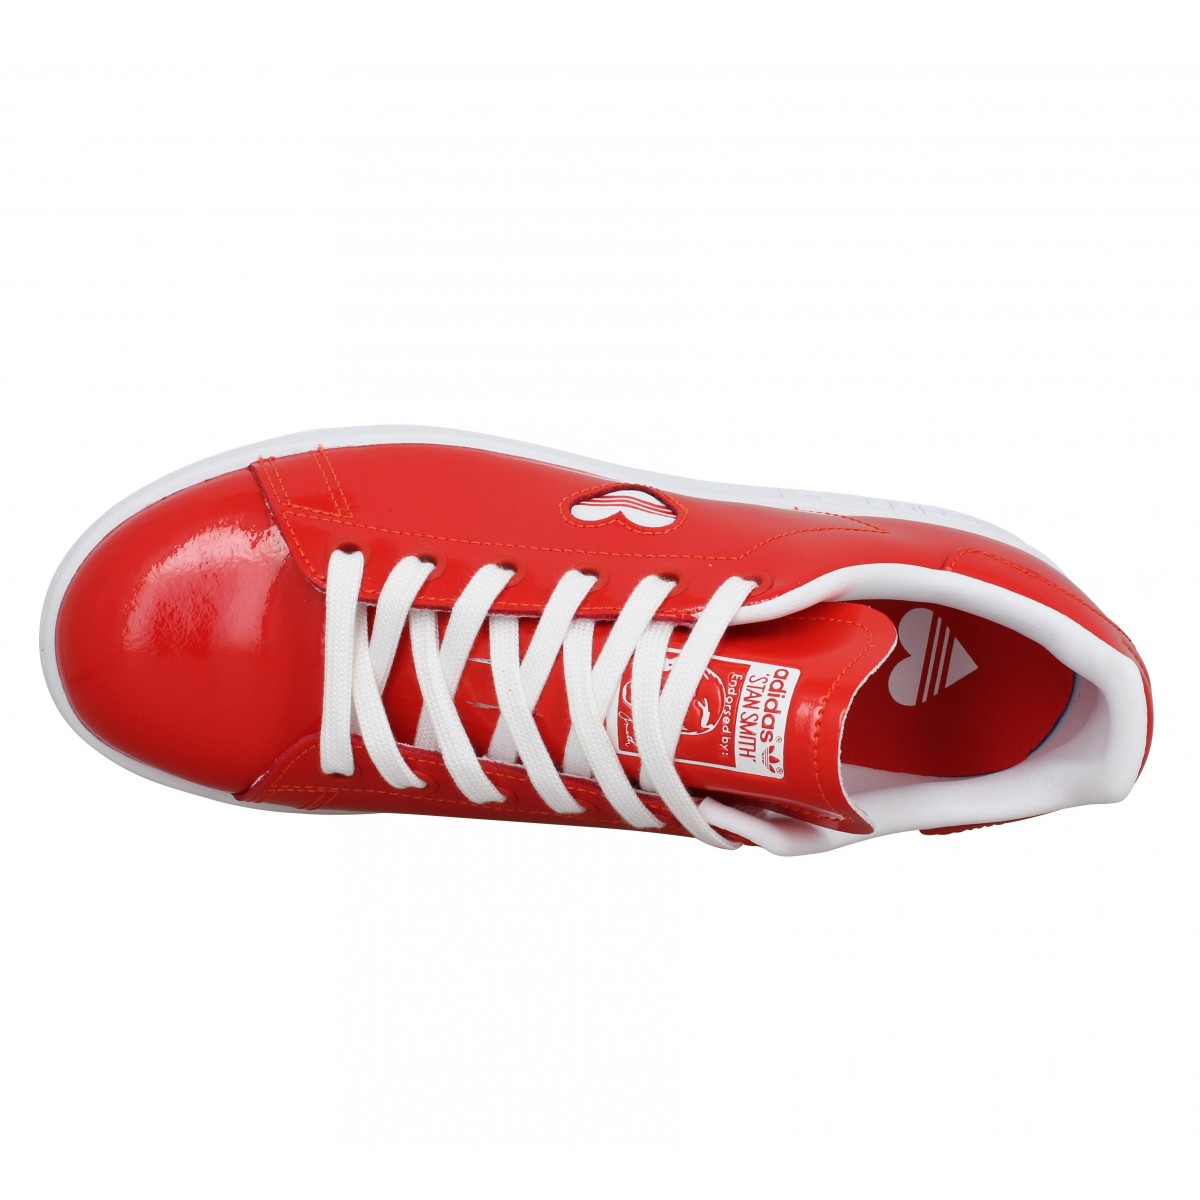 ADIDAS Stan Smith vernis Femme Rouge